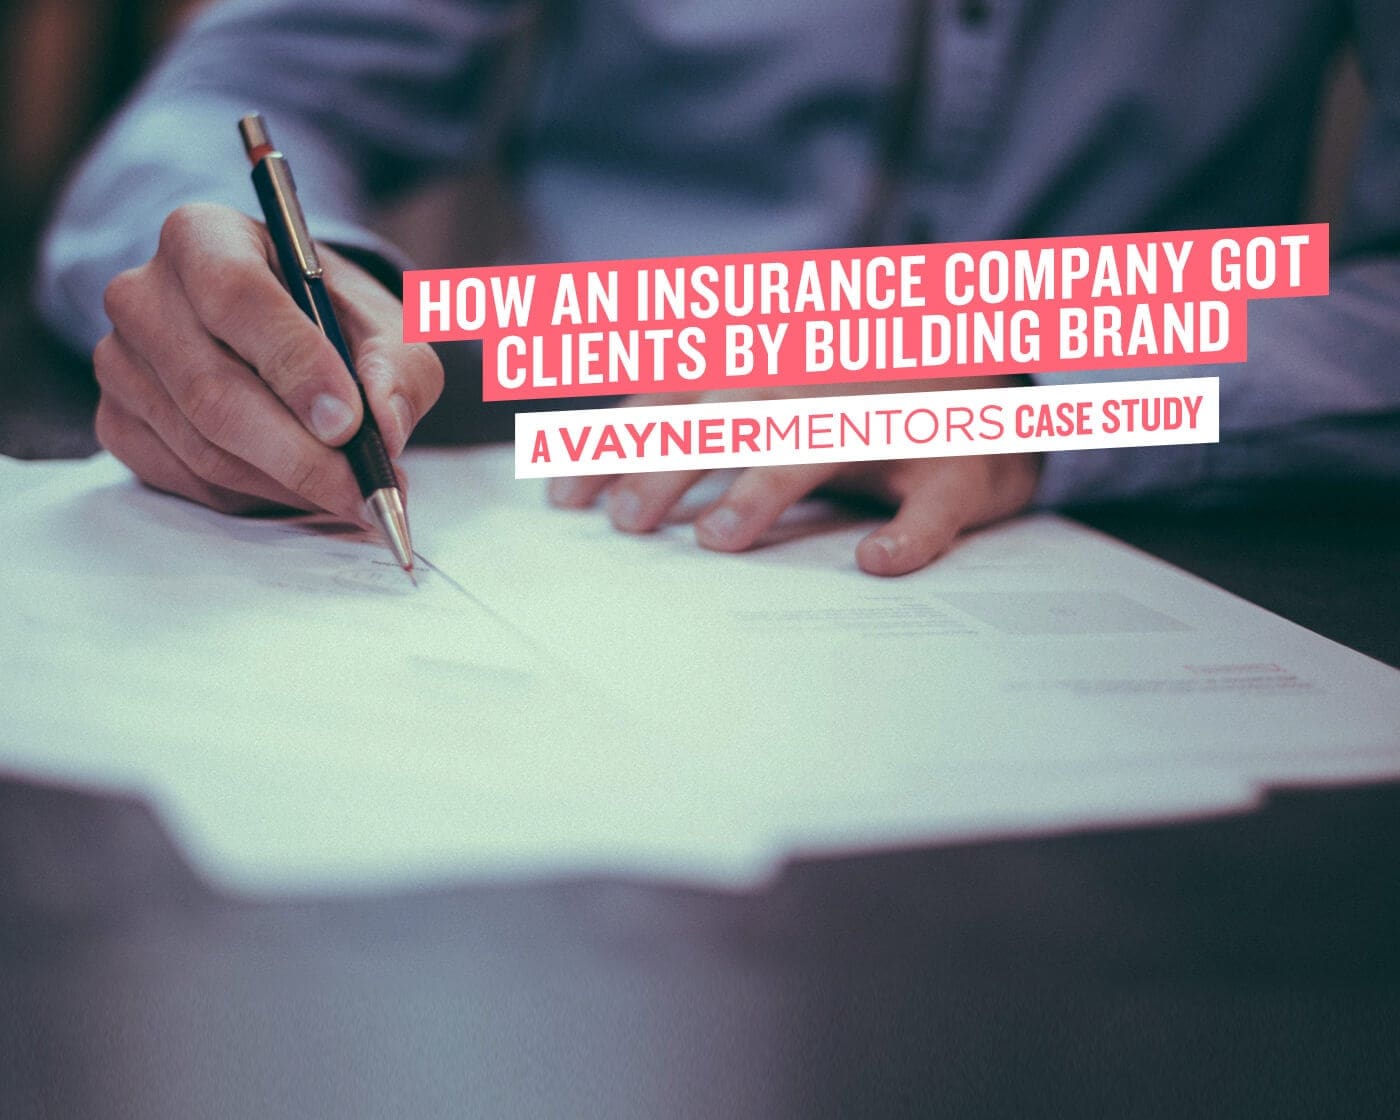 How An Insurance Company Got Clients By Building Brand